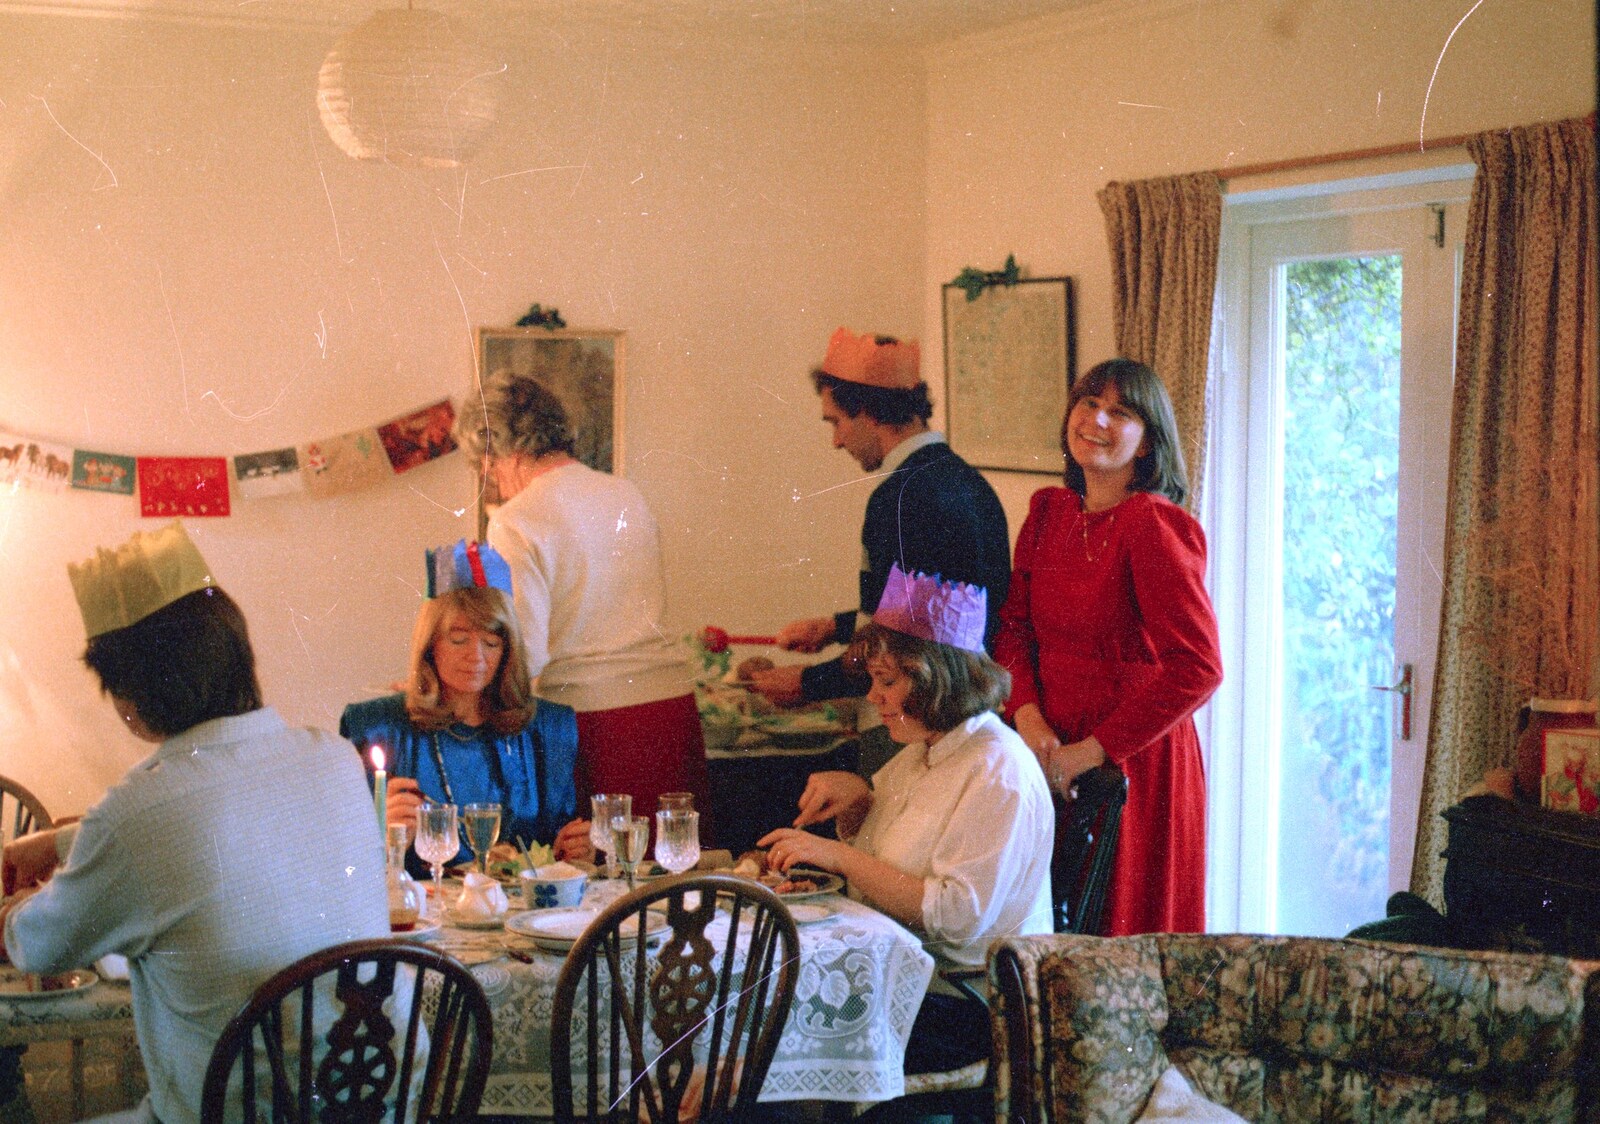 Dinner is served from Christmas with Neil and Caroline, Burton, Dorset - 25th December 1986